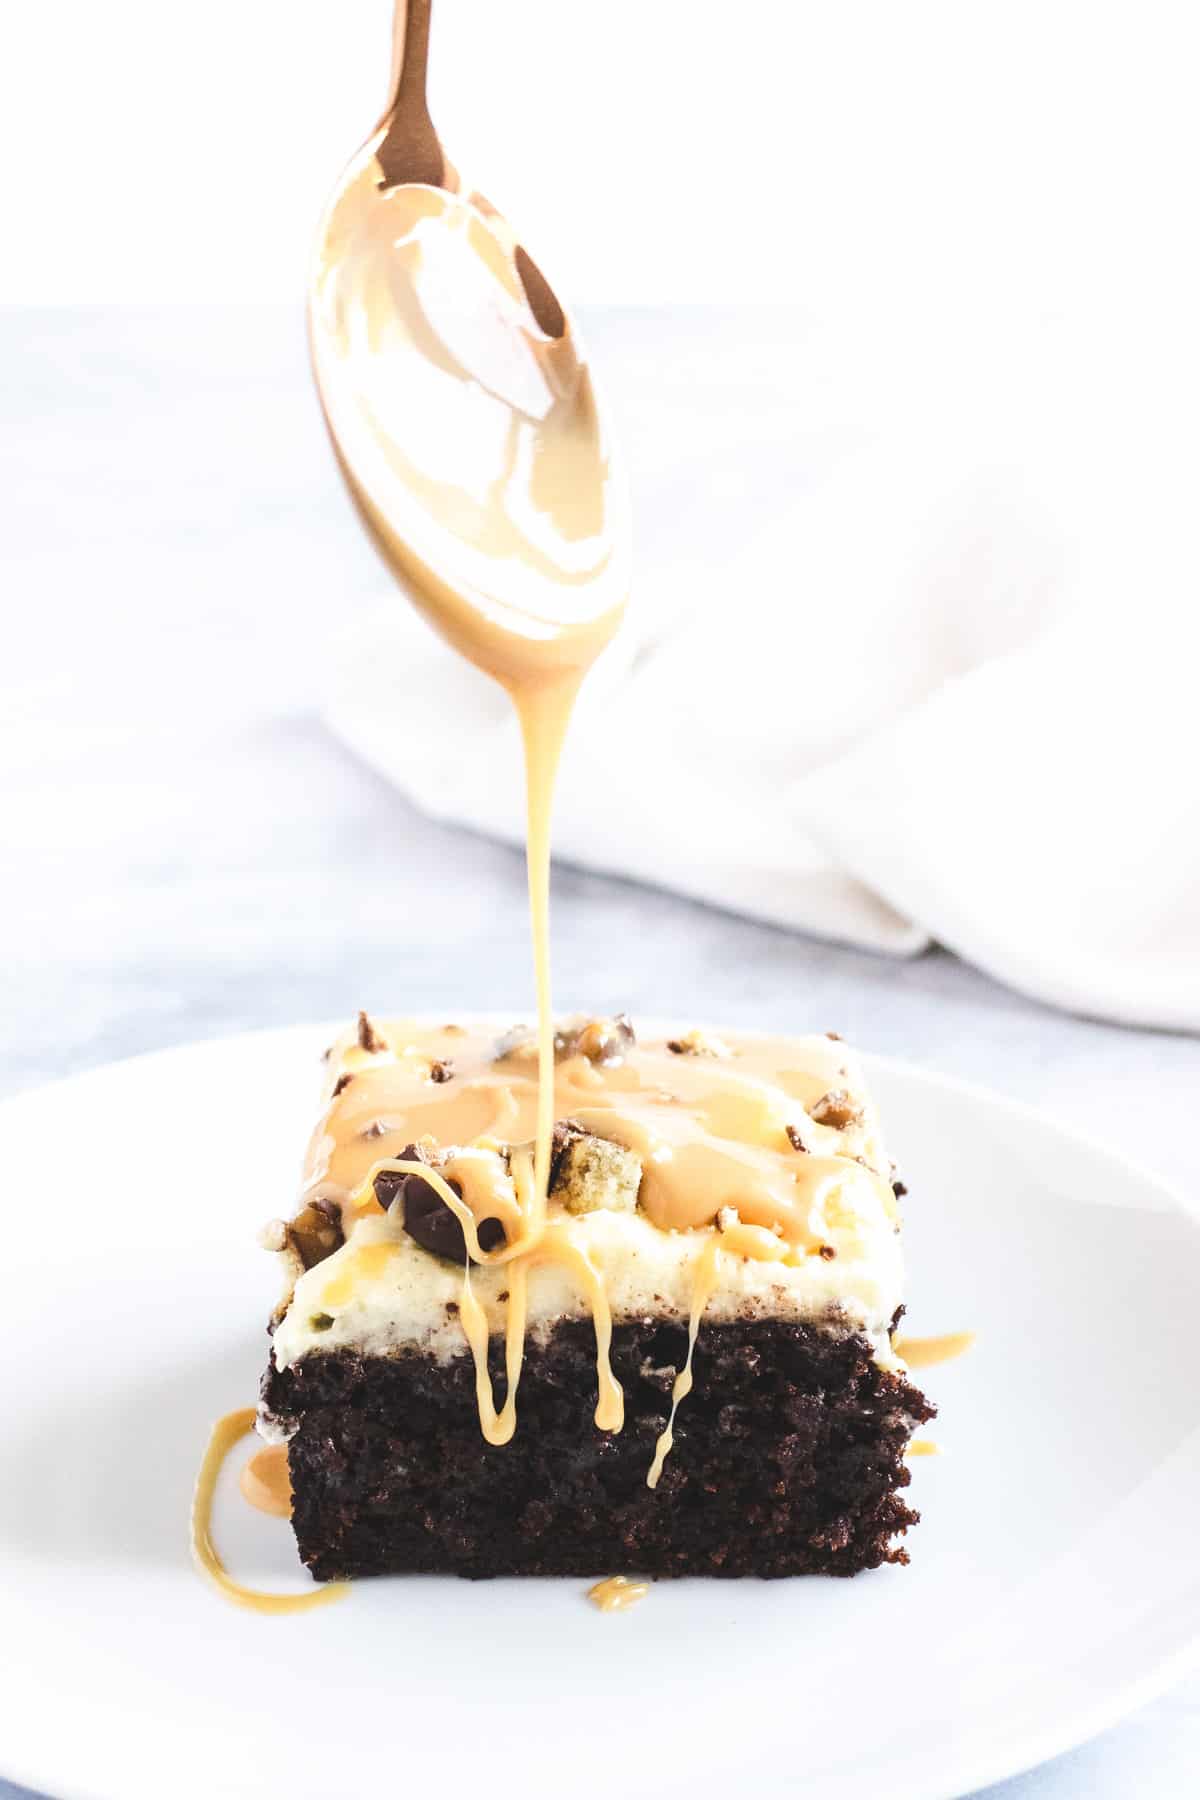 Slice of chocolate cake being drizzled in caramel sauce